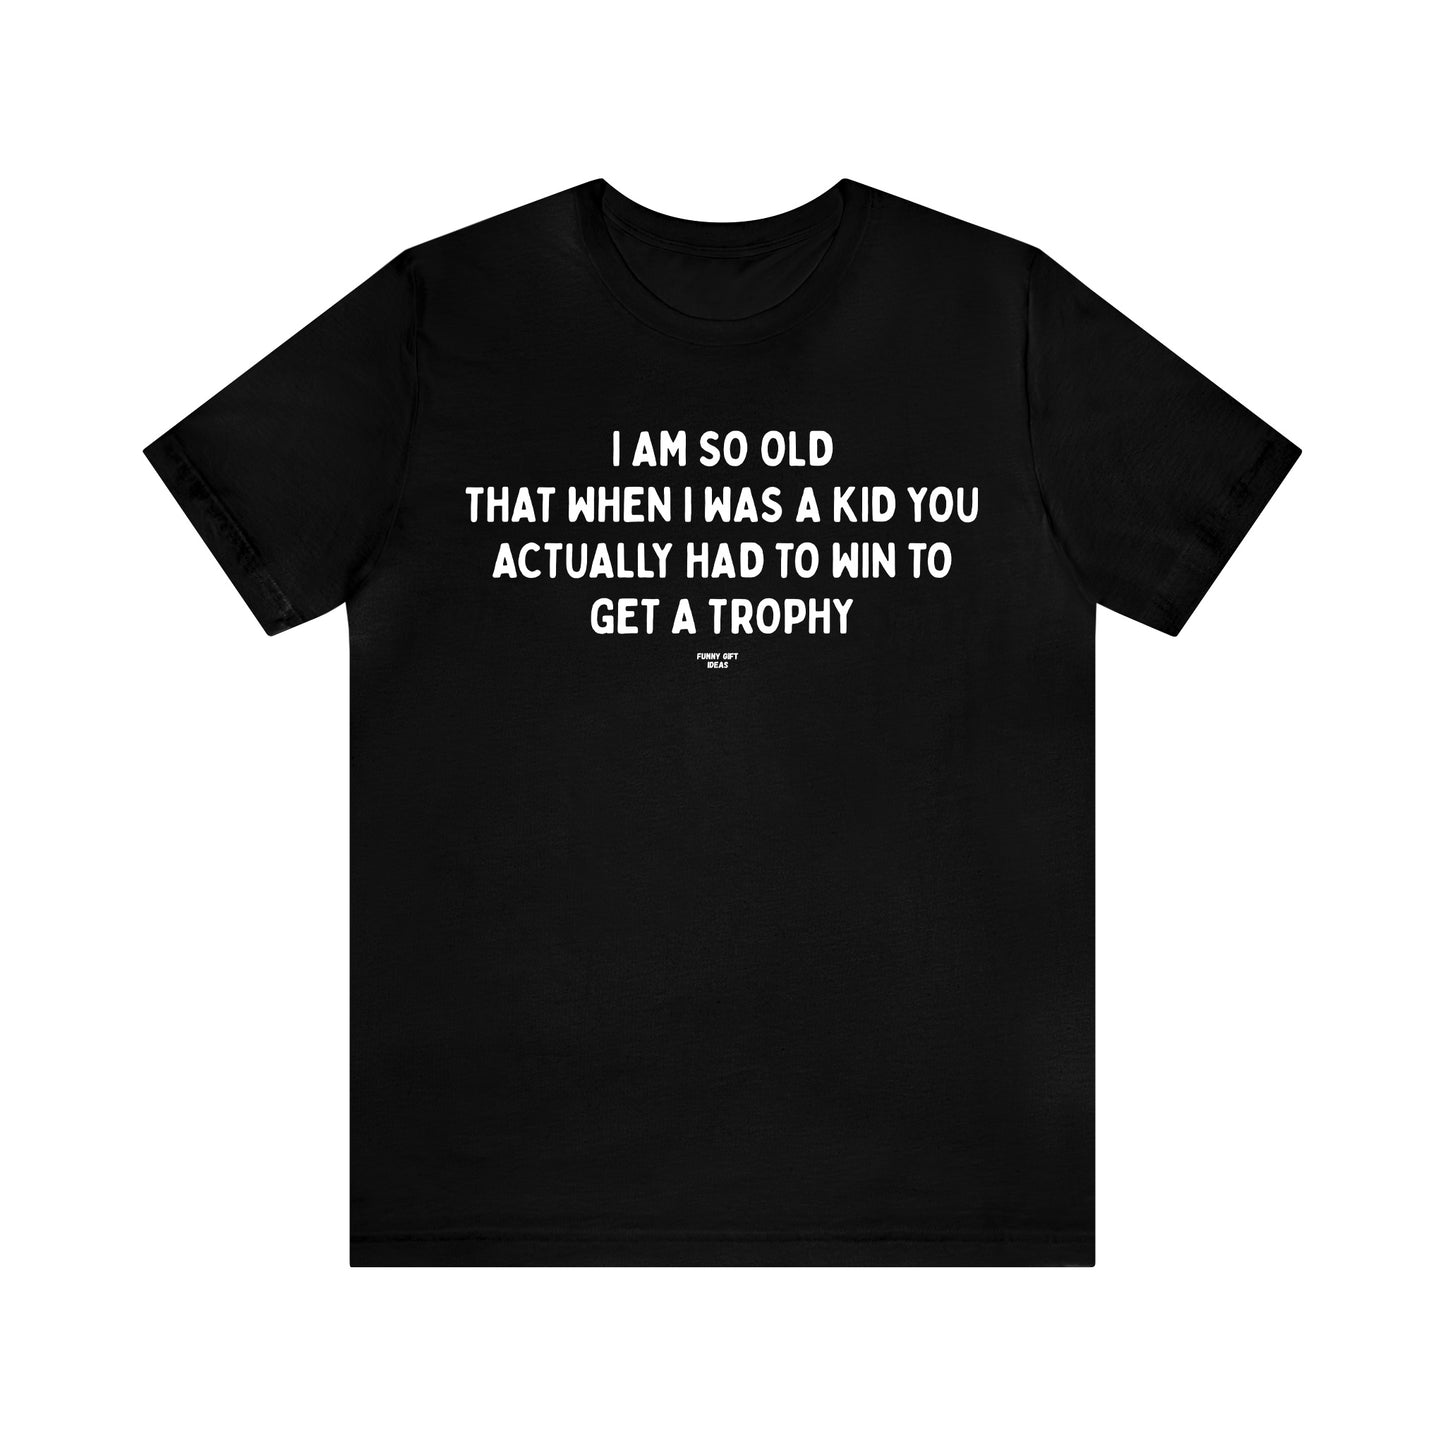 Mens T Shirts - I Am So Old That When I Was a Kid You Actually Had to Win to Get a Trophy - Funny Men T Shirts